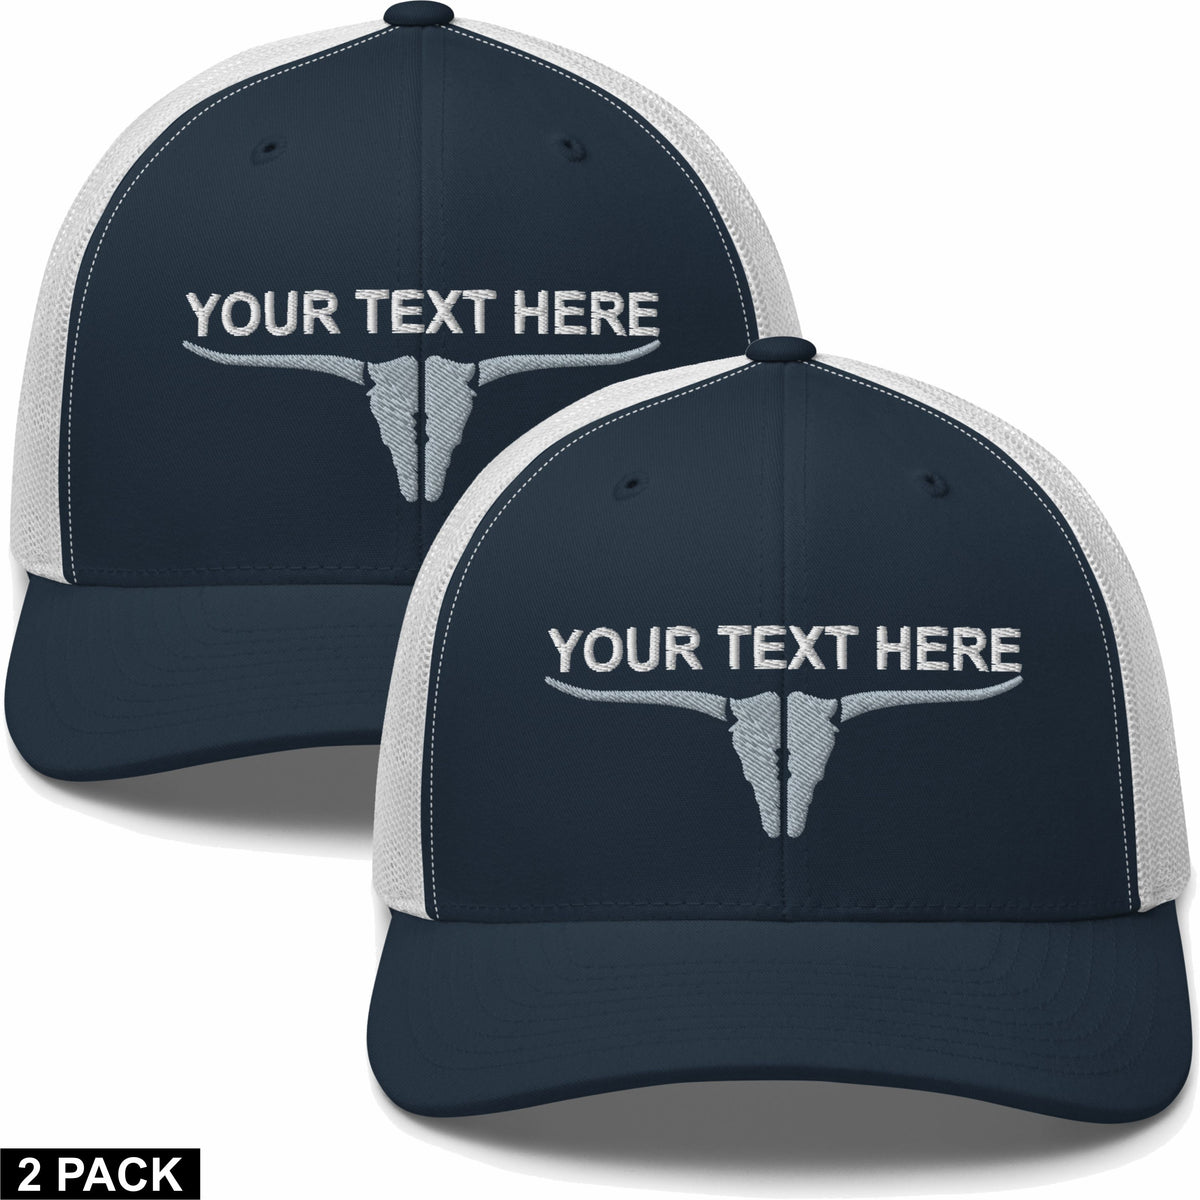 2 Embroidered Hats - Bull Skull Split - Your Text Here - Free Shipping